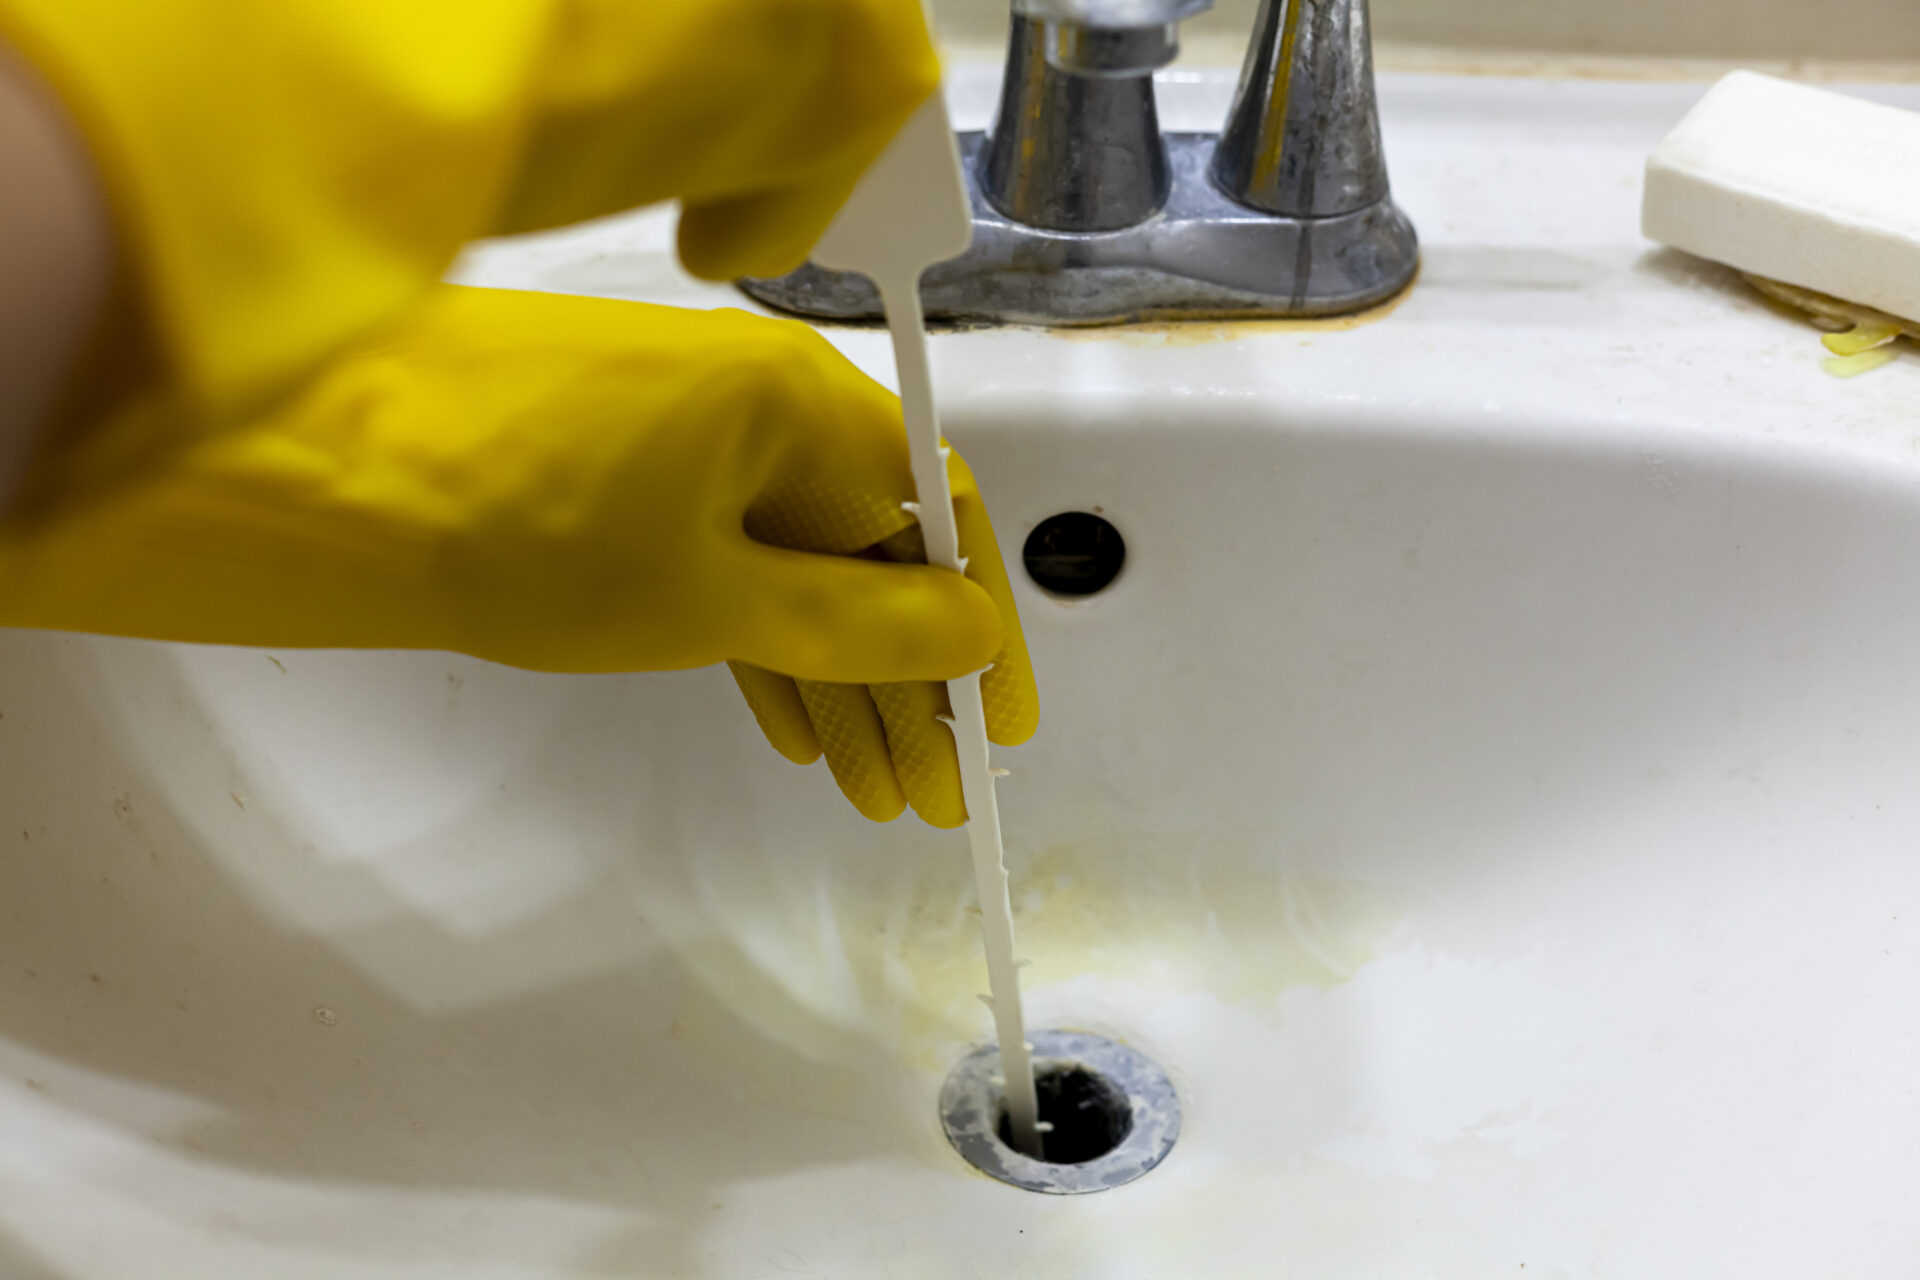 Person trying to unclog the drain of a sink using snake drain or auger tool which helps pull hair and soap debris from the sinkhole. MidCity Plumbers